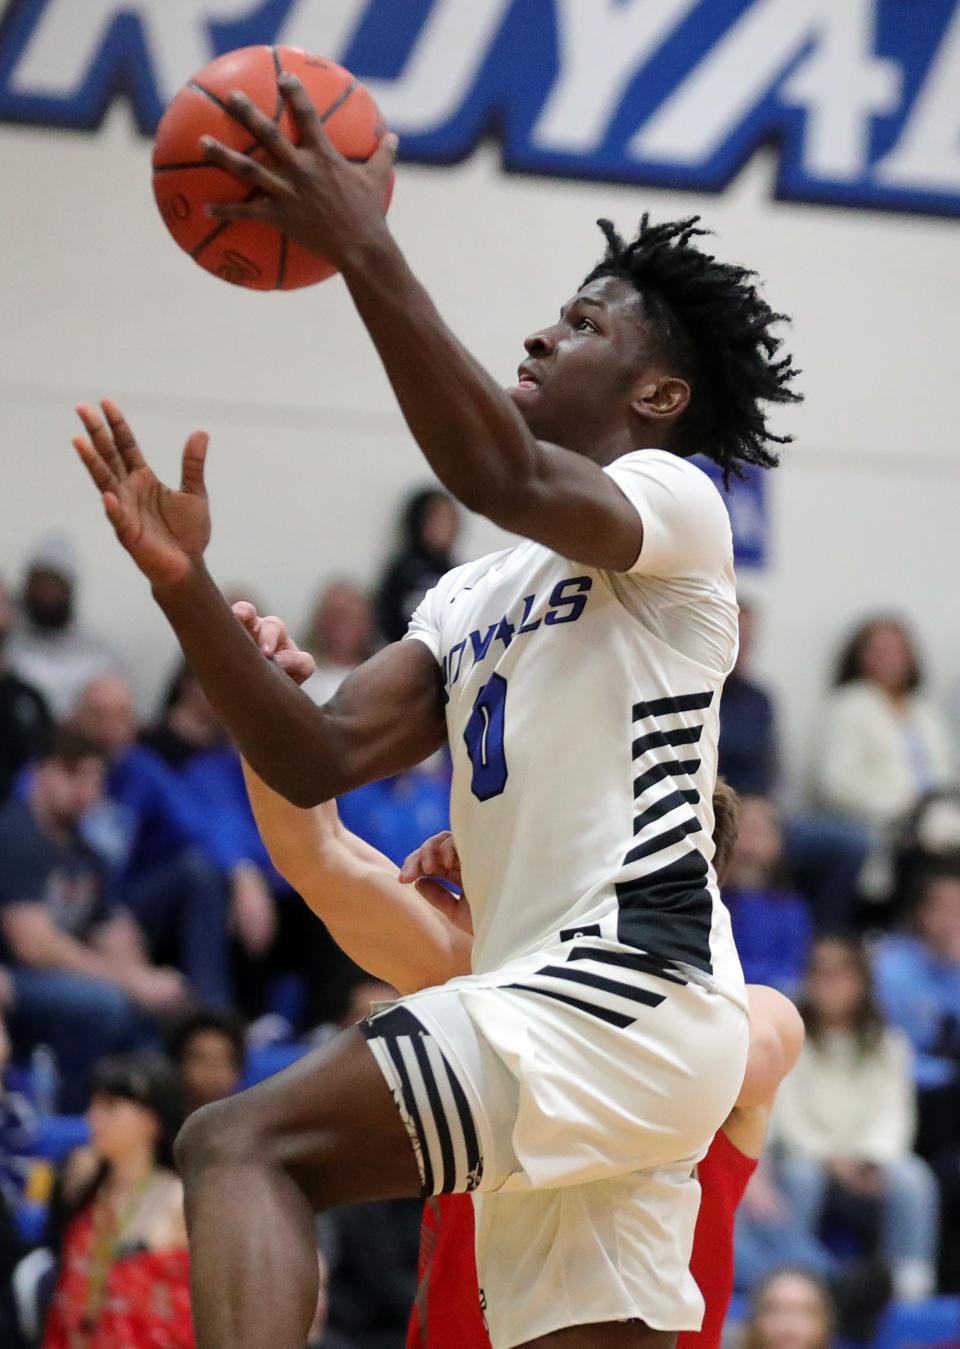 Niles Nuru can take over a game whenever he wants for CVCA this season.